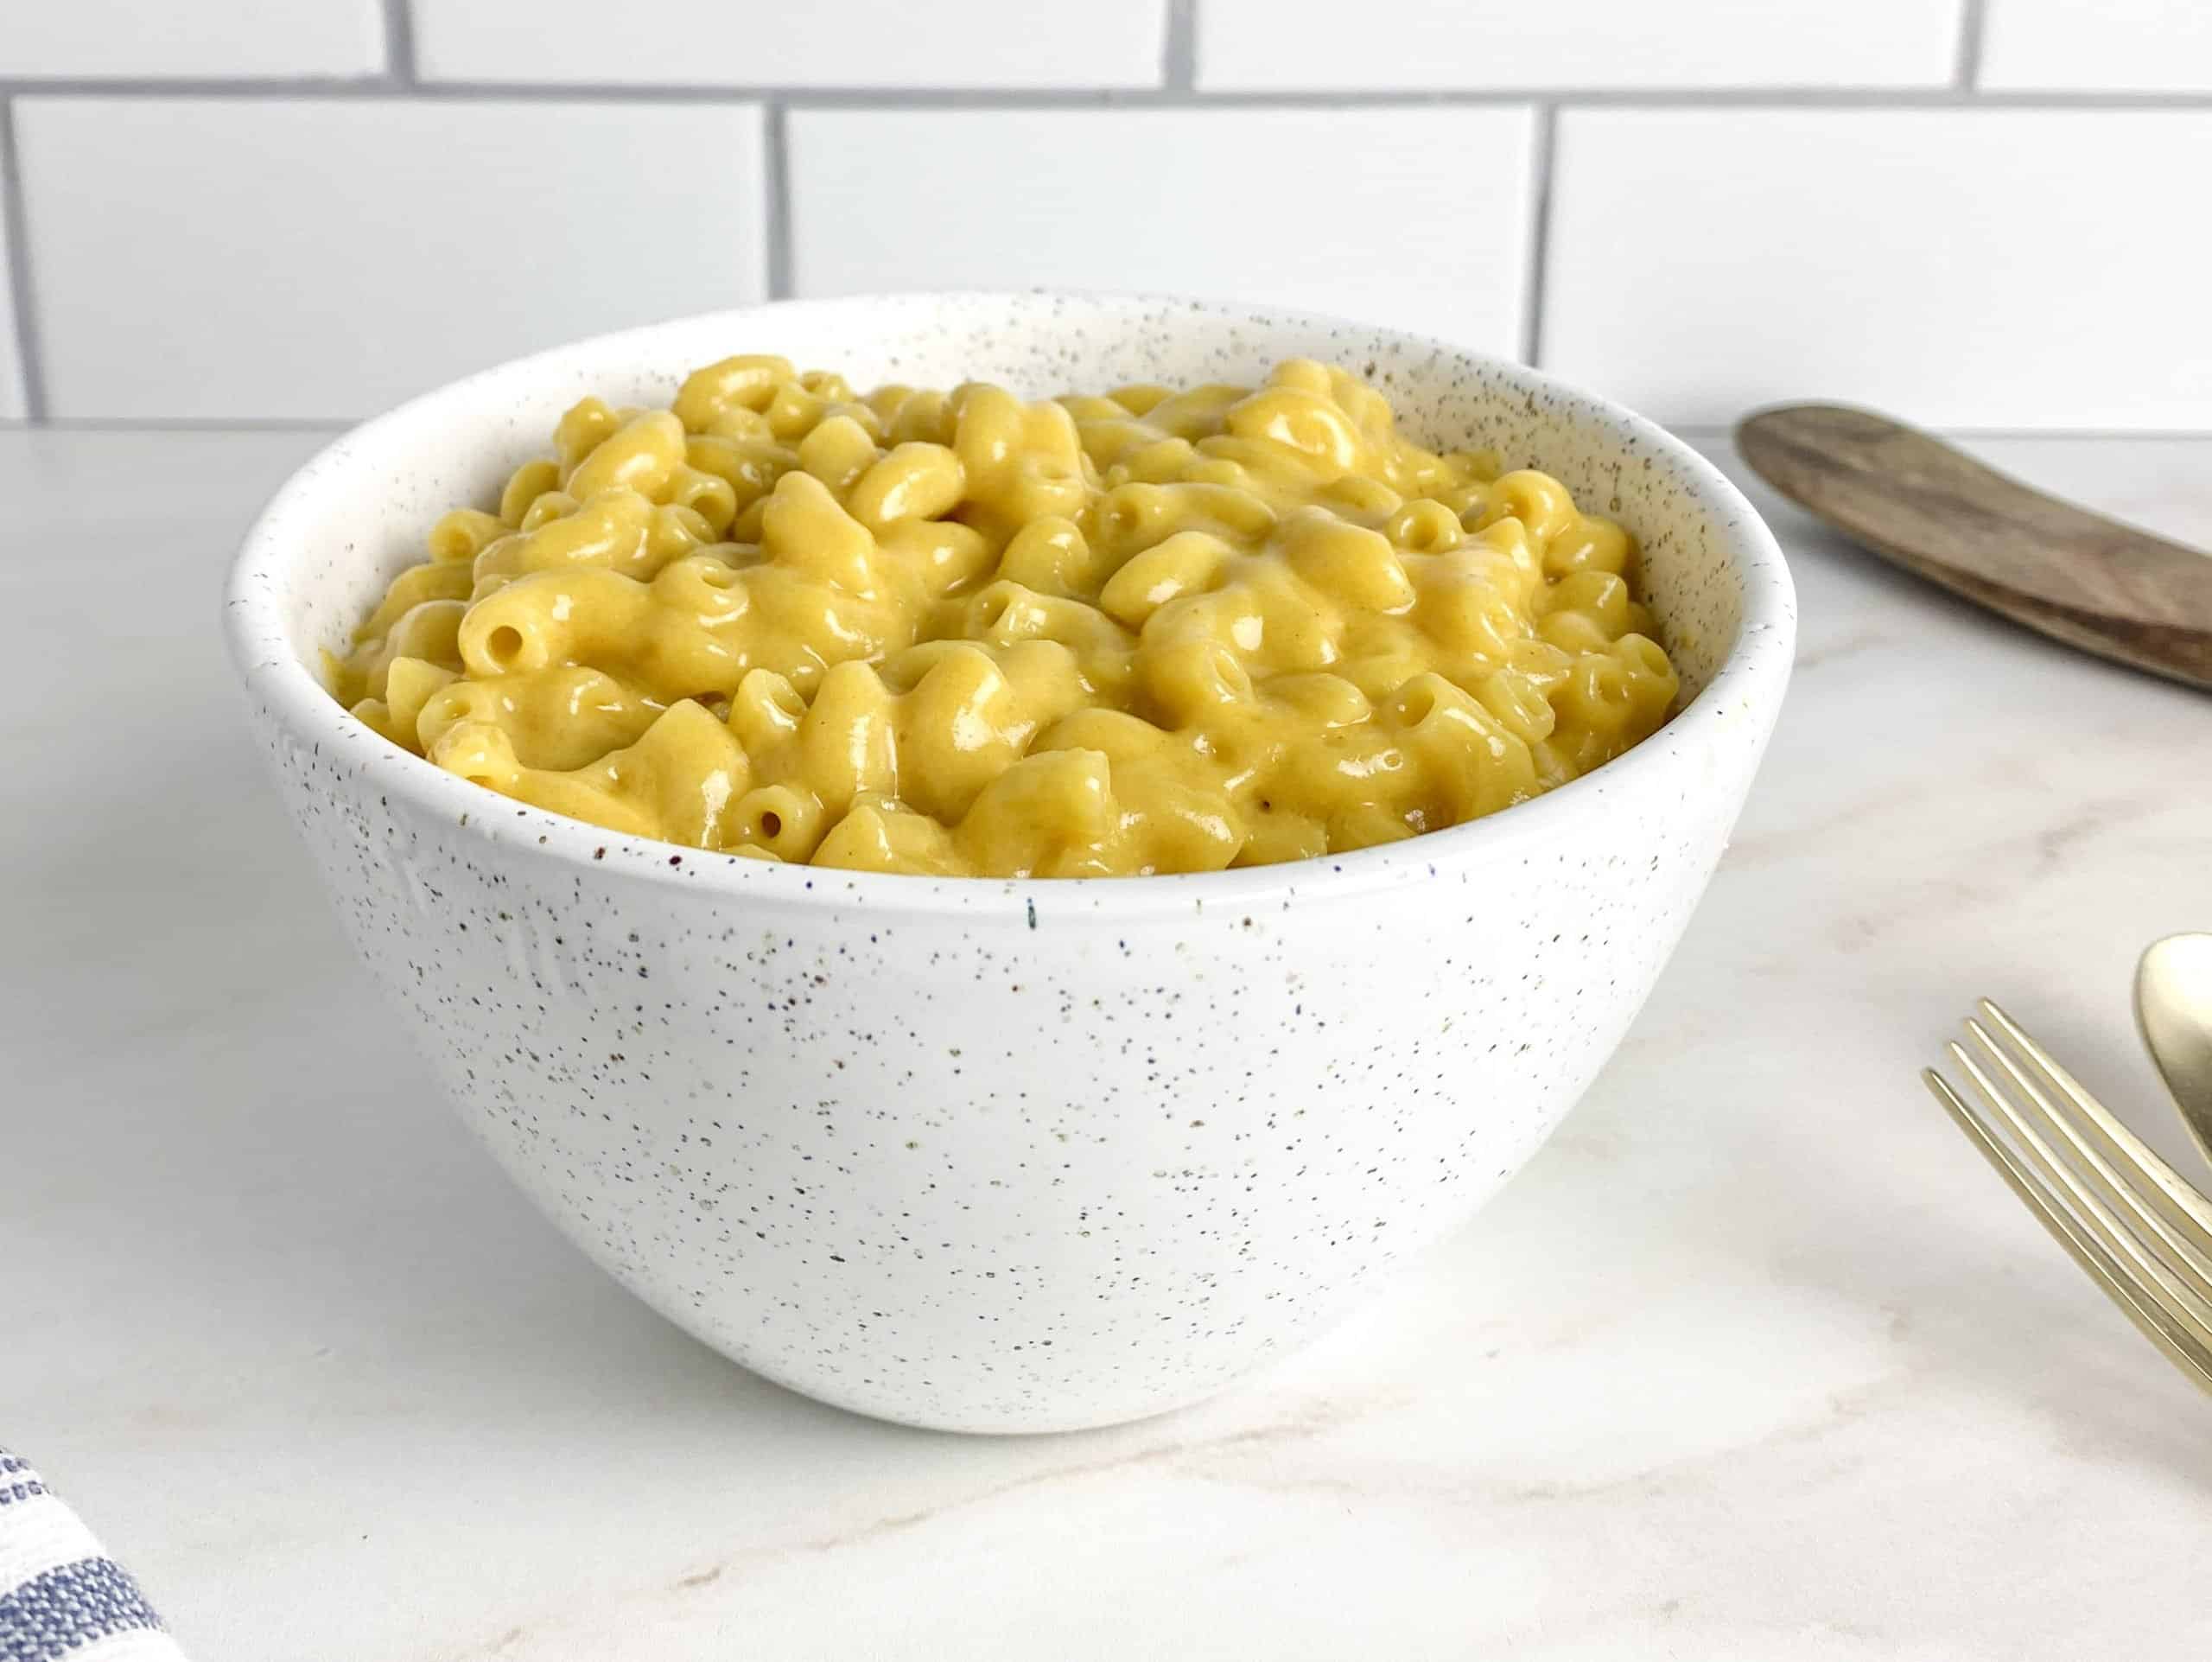 Dairy-free Mac and cheese in a white speckled bowl.